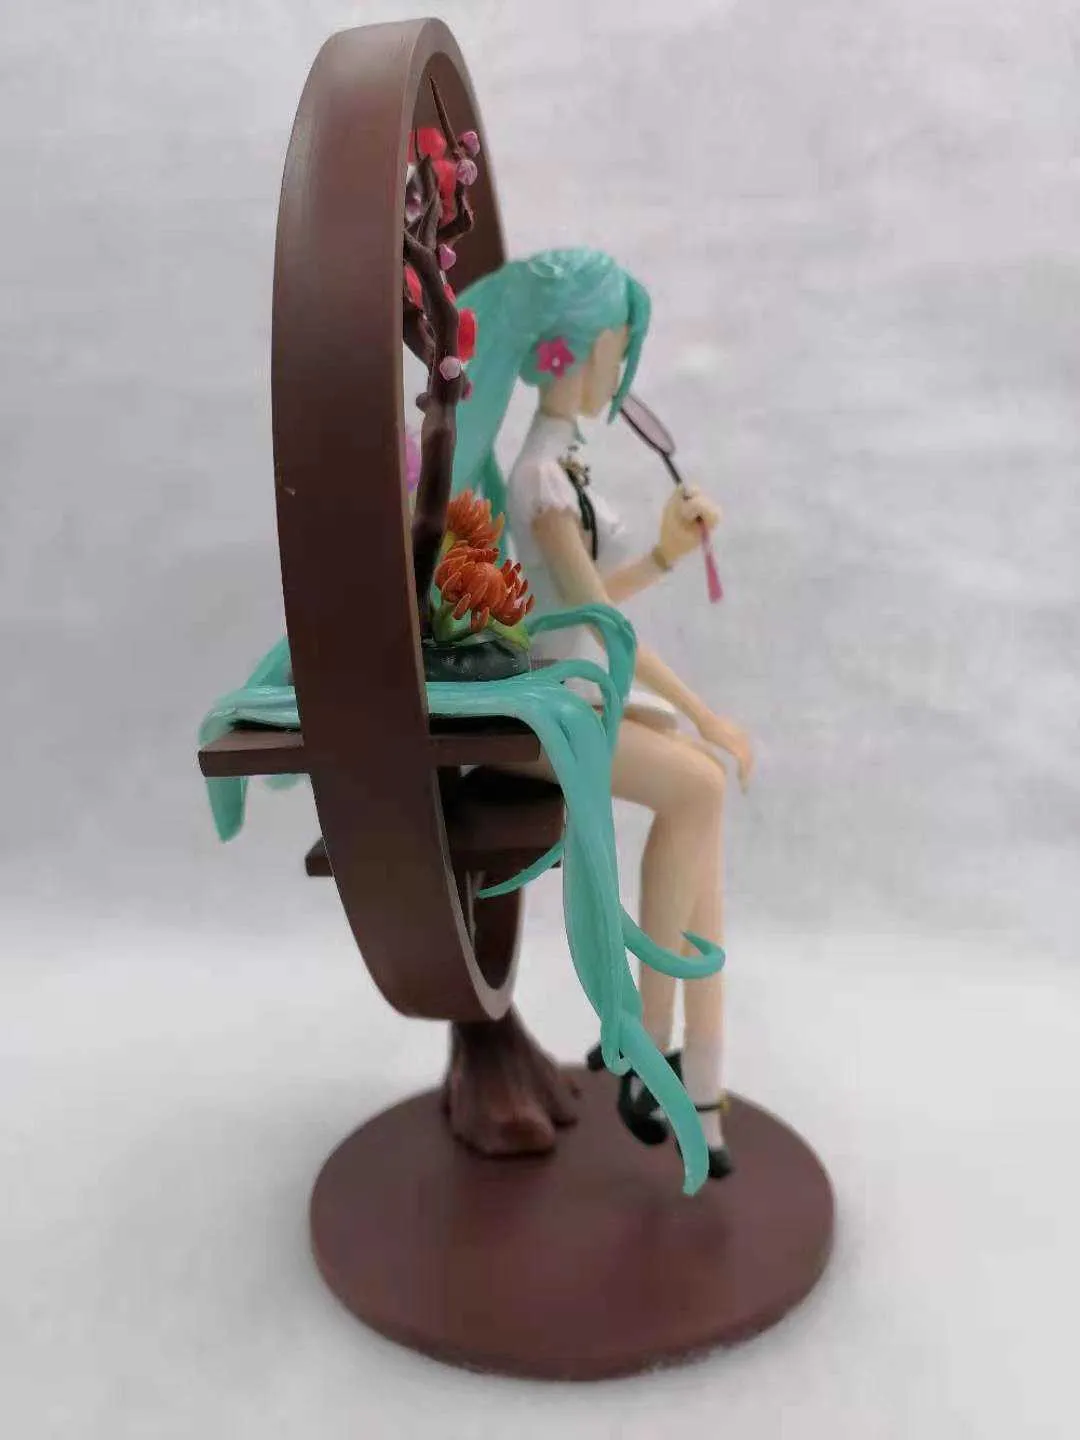 Anime VOCALOID Cheongsam Sexy Figures PVC Action Figure Toy Beauty Girl Statue Collection Model Doll Gifts Figures Girls Cartoon Toys